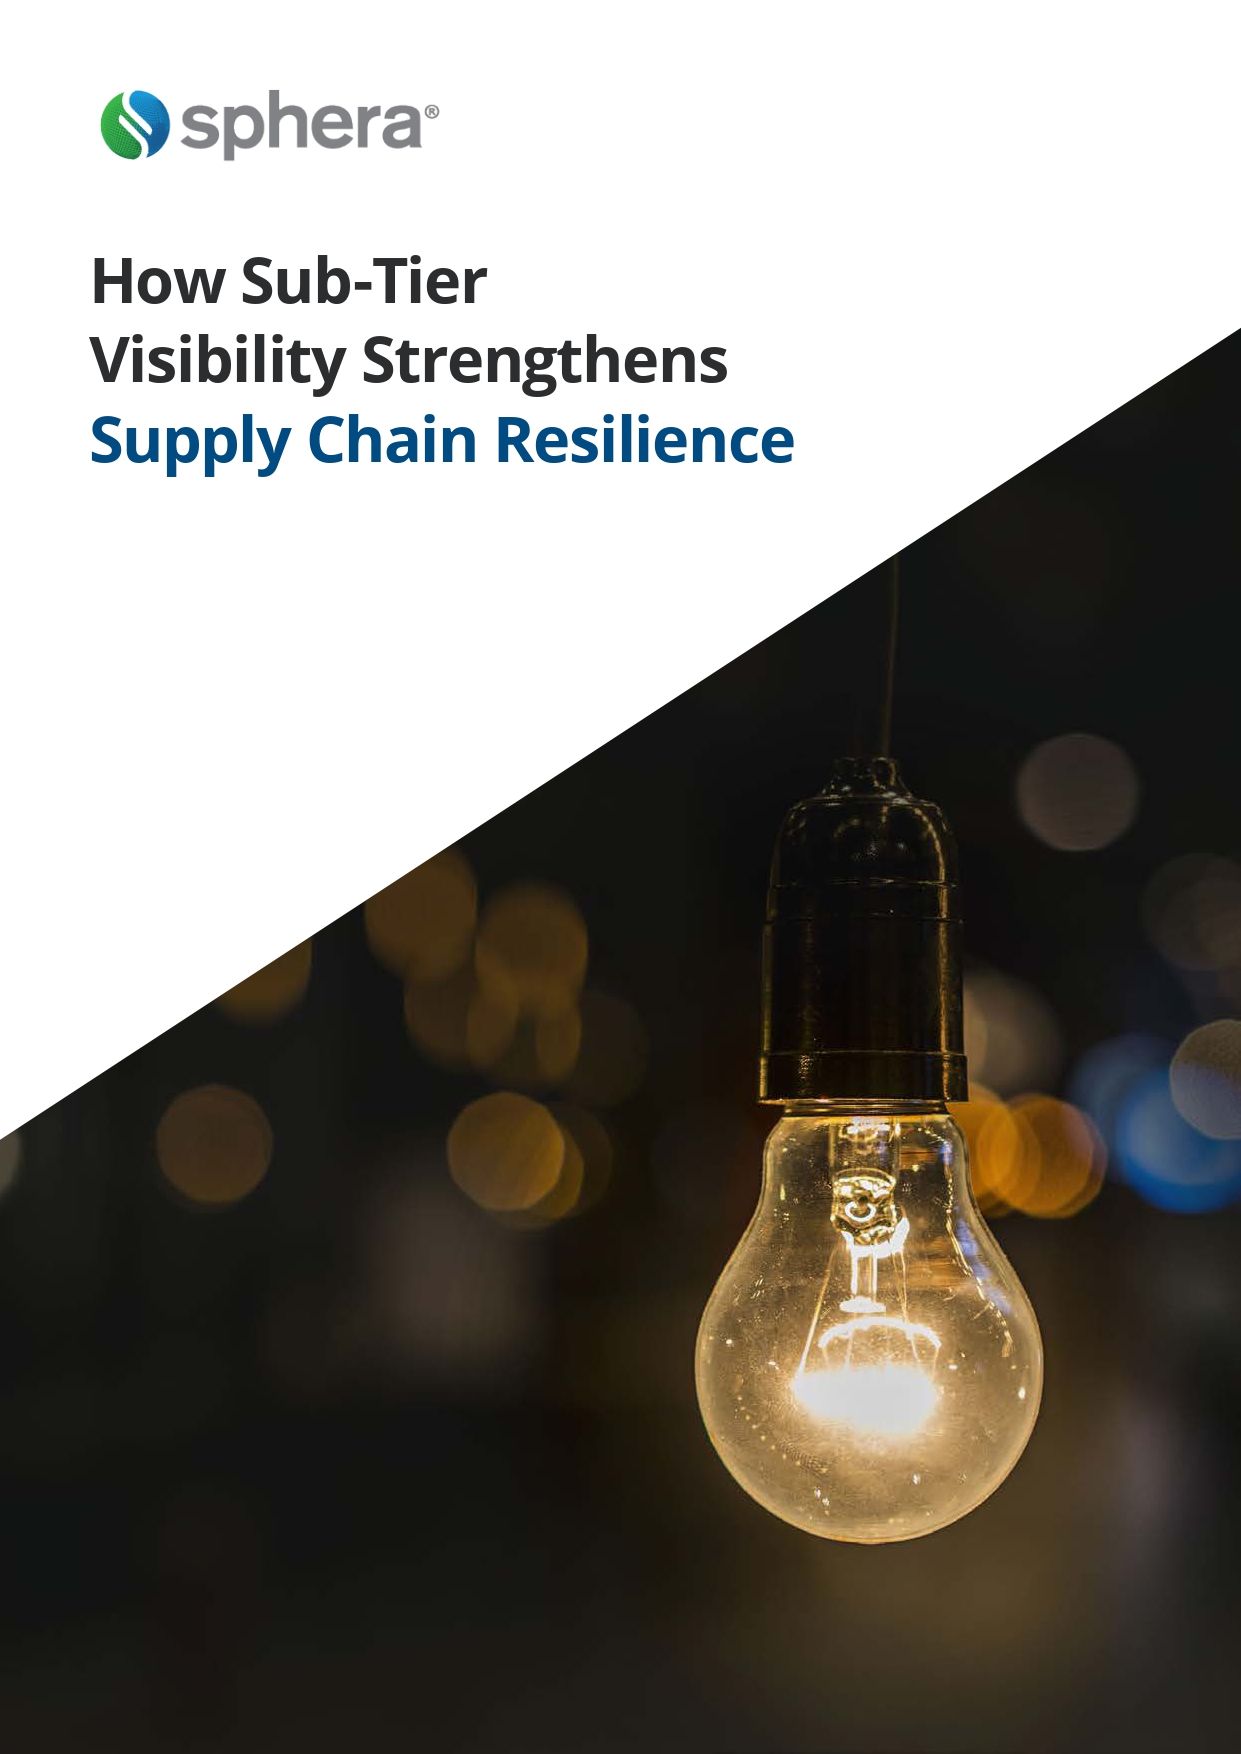 How Sub-Tier Visibility Strengthens Supply Chain Resilience